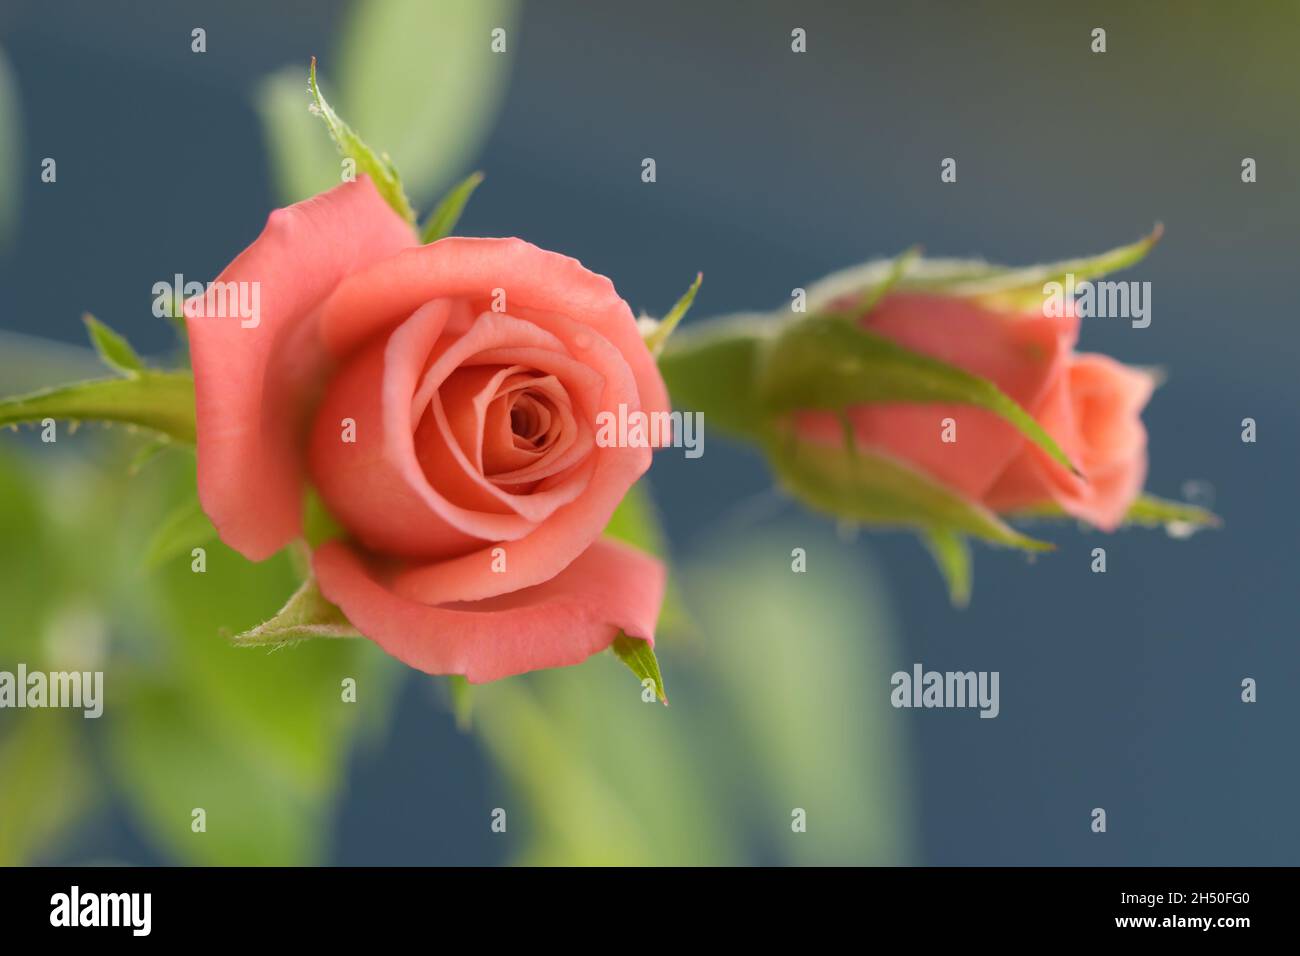 Tiny salmon pink Miniature rose with blue background Stock Photo